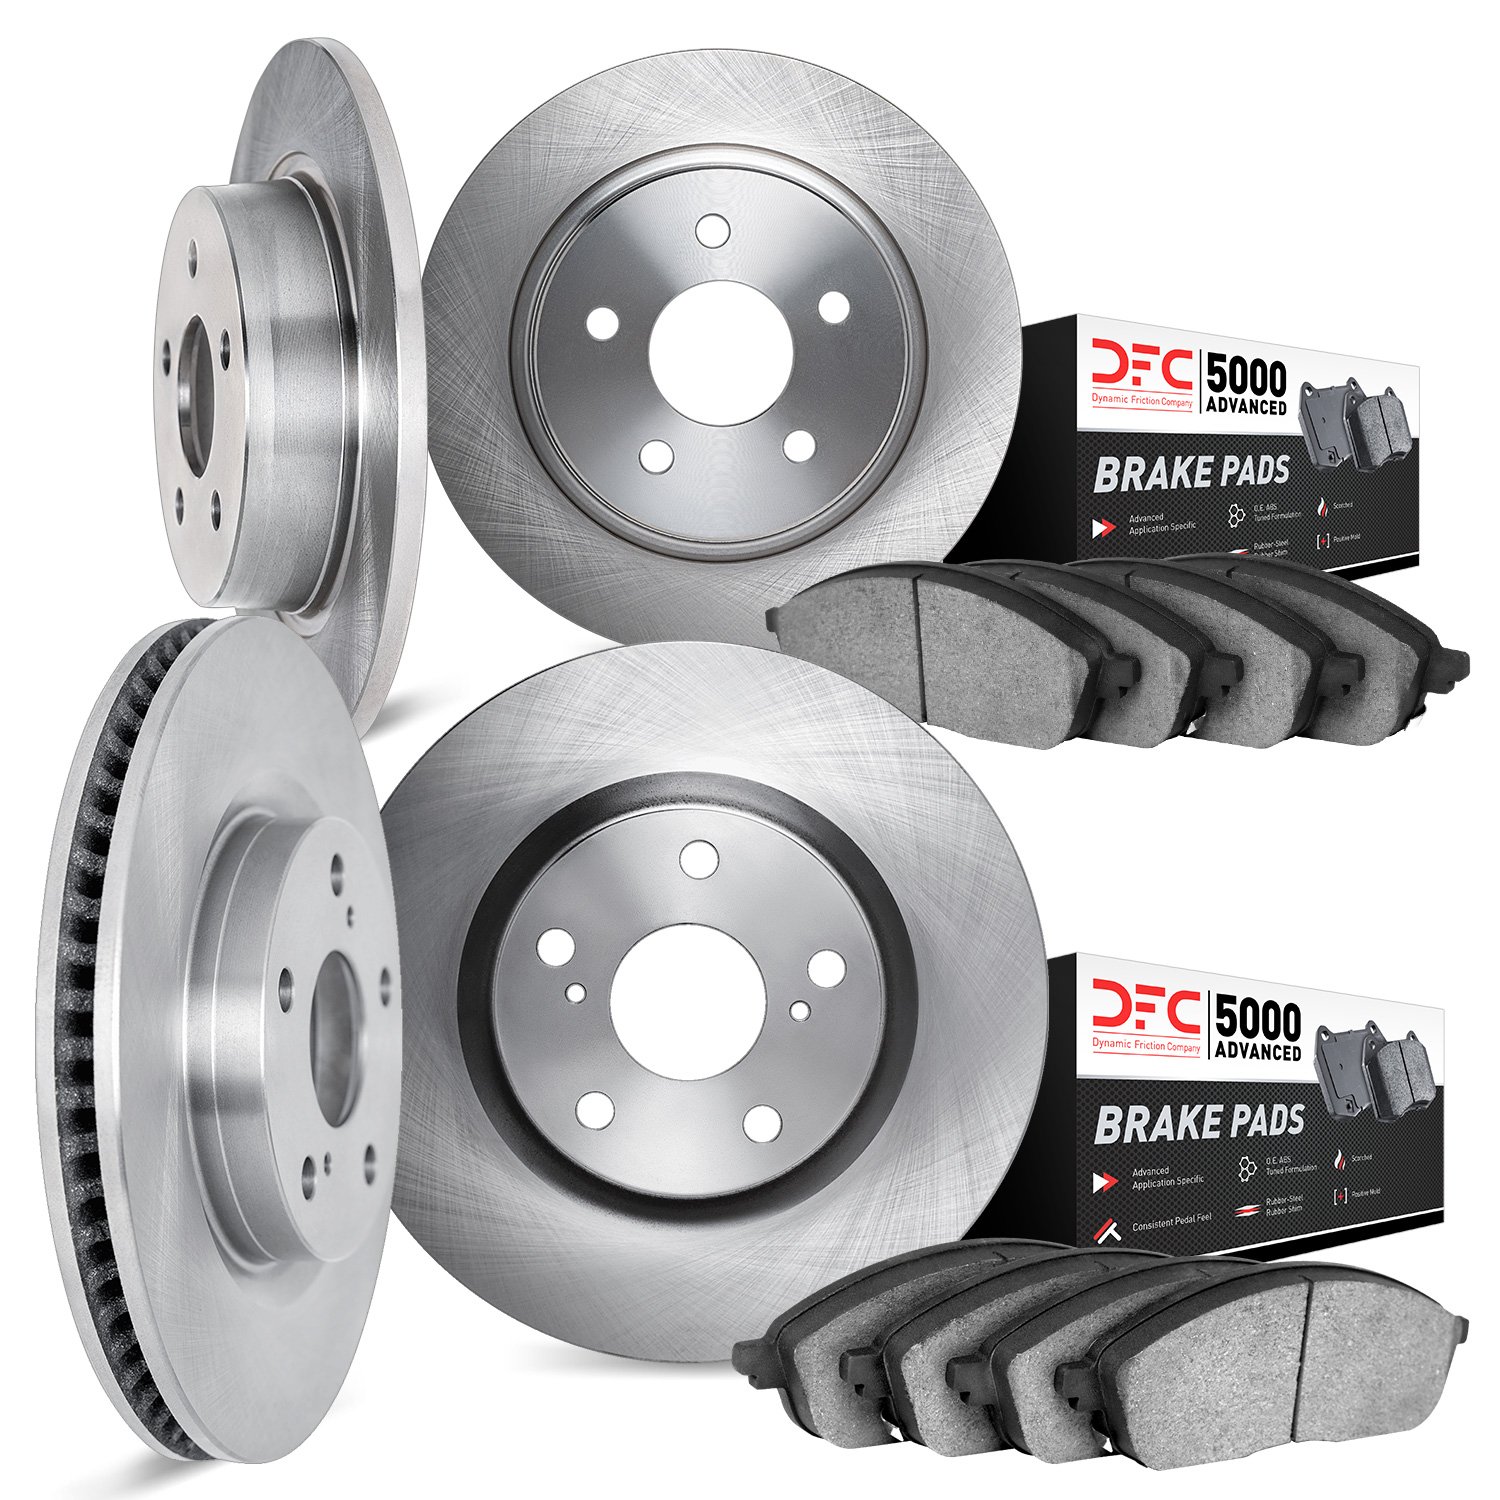 6504-55152 Brake Rotors w/5000 Advanced Brake Pads Kit, 2020-2020 Ford/Lincoln/Mercury/Mazda, Position: Front and Rear